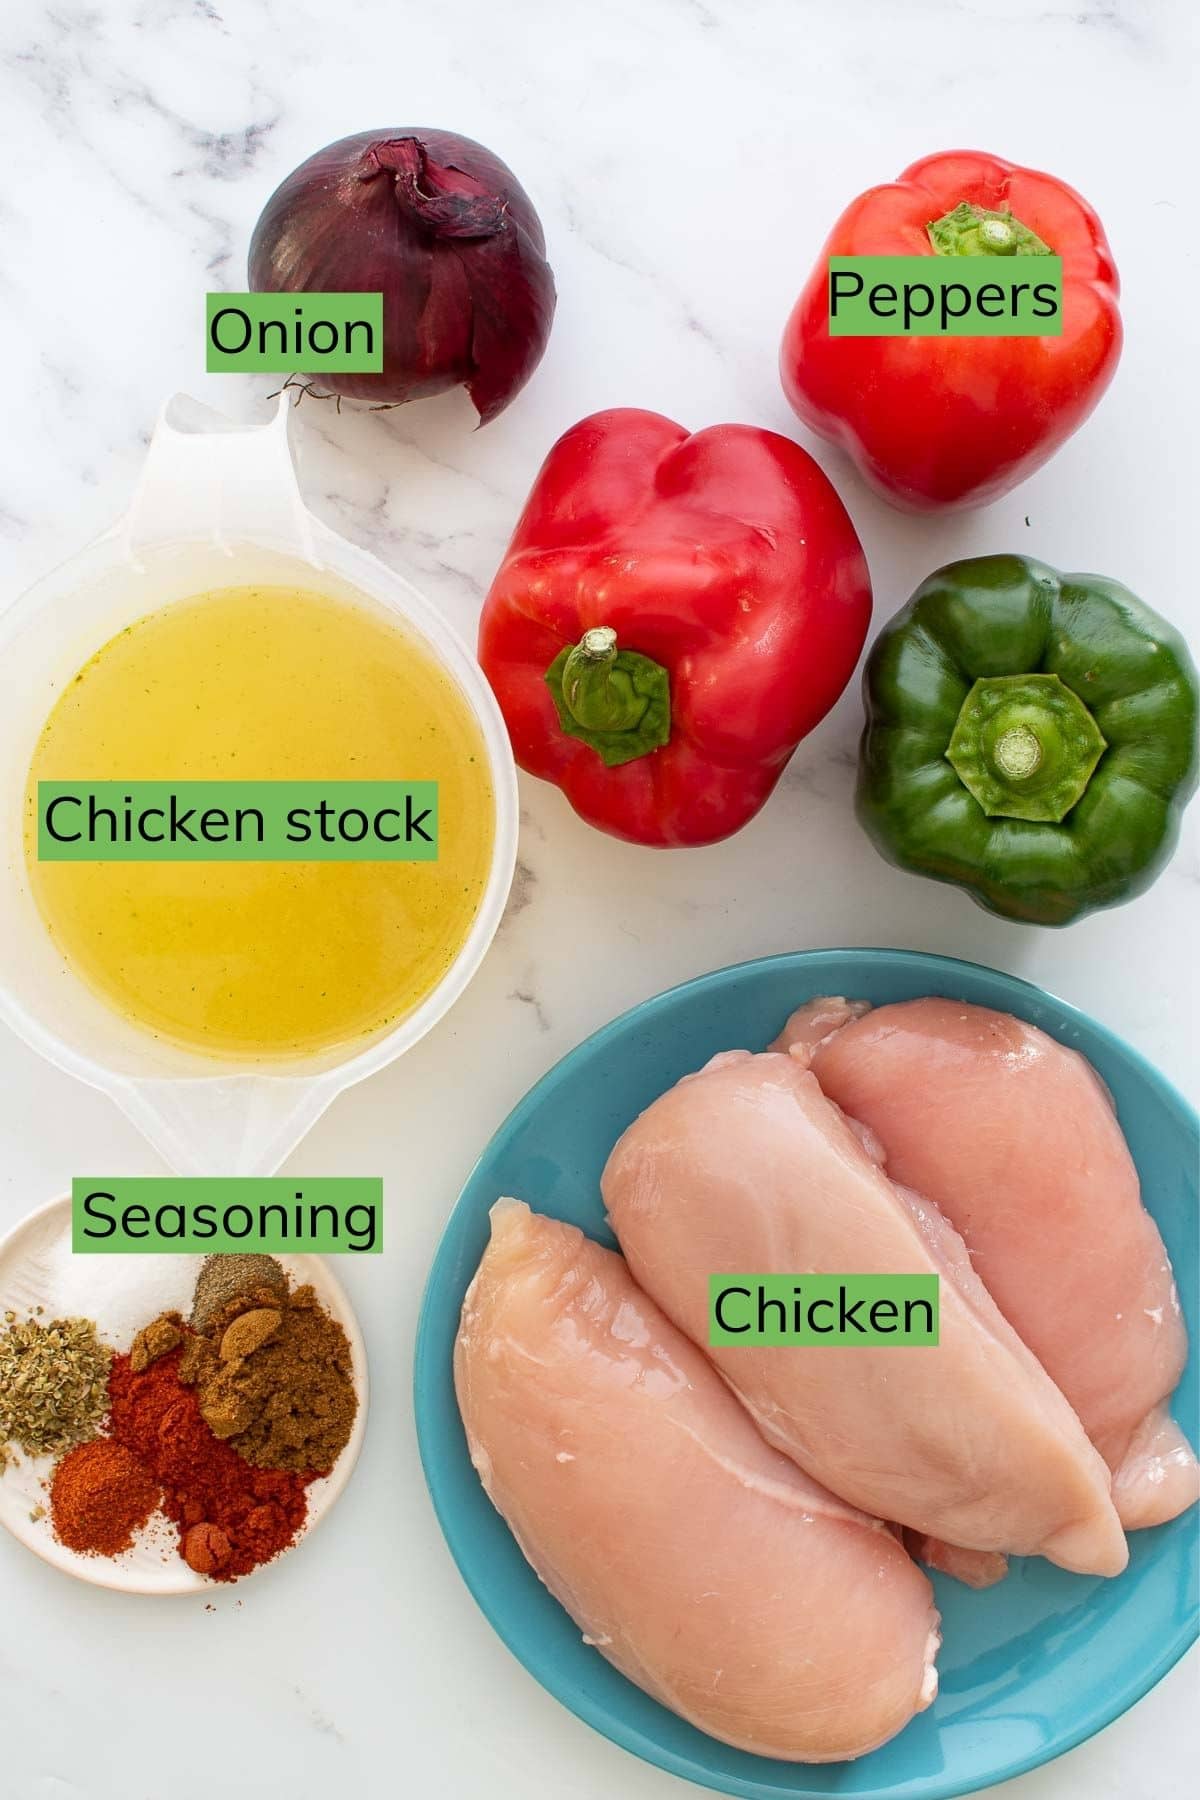 The ingredients needed to make pressure cooker fajitas laid out on a table.